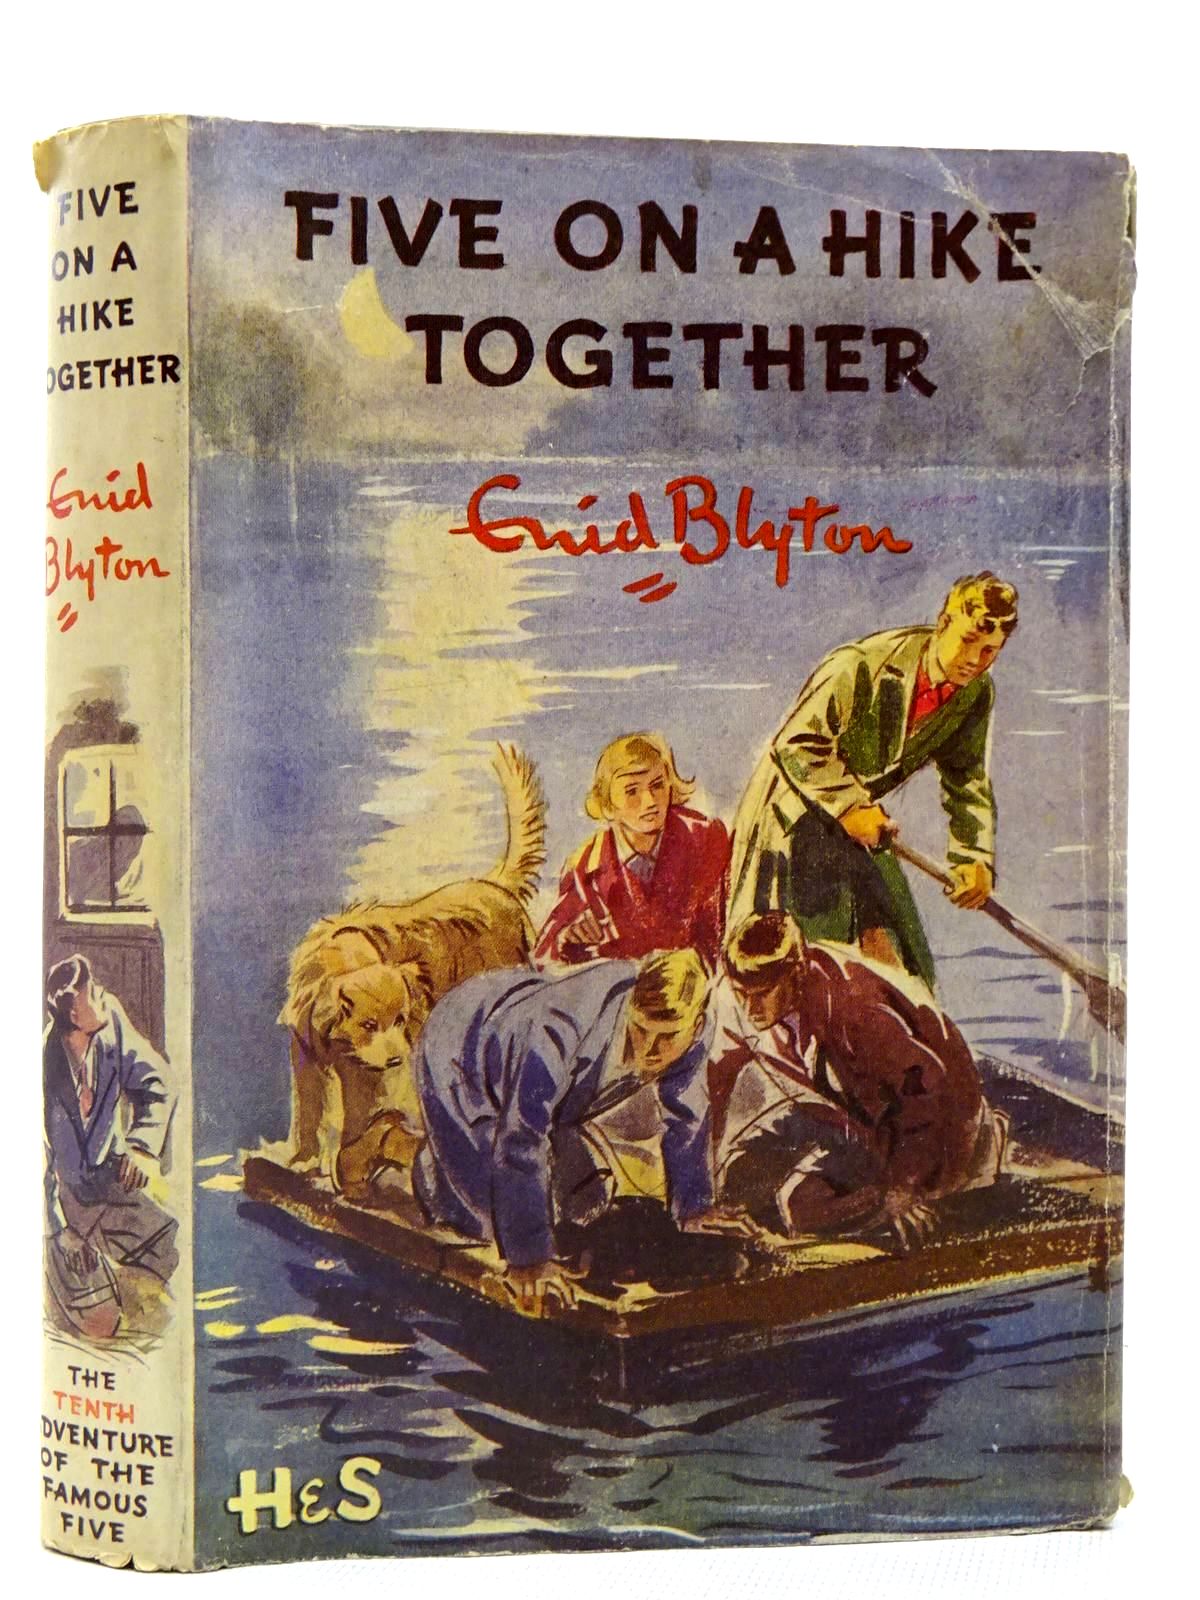 Cover of FIVE ON A HIKE TOGETHER by Enid Blyton